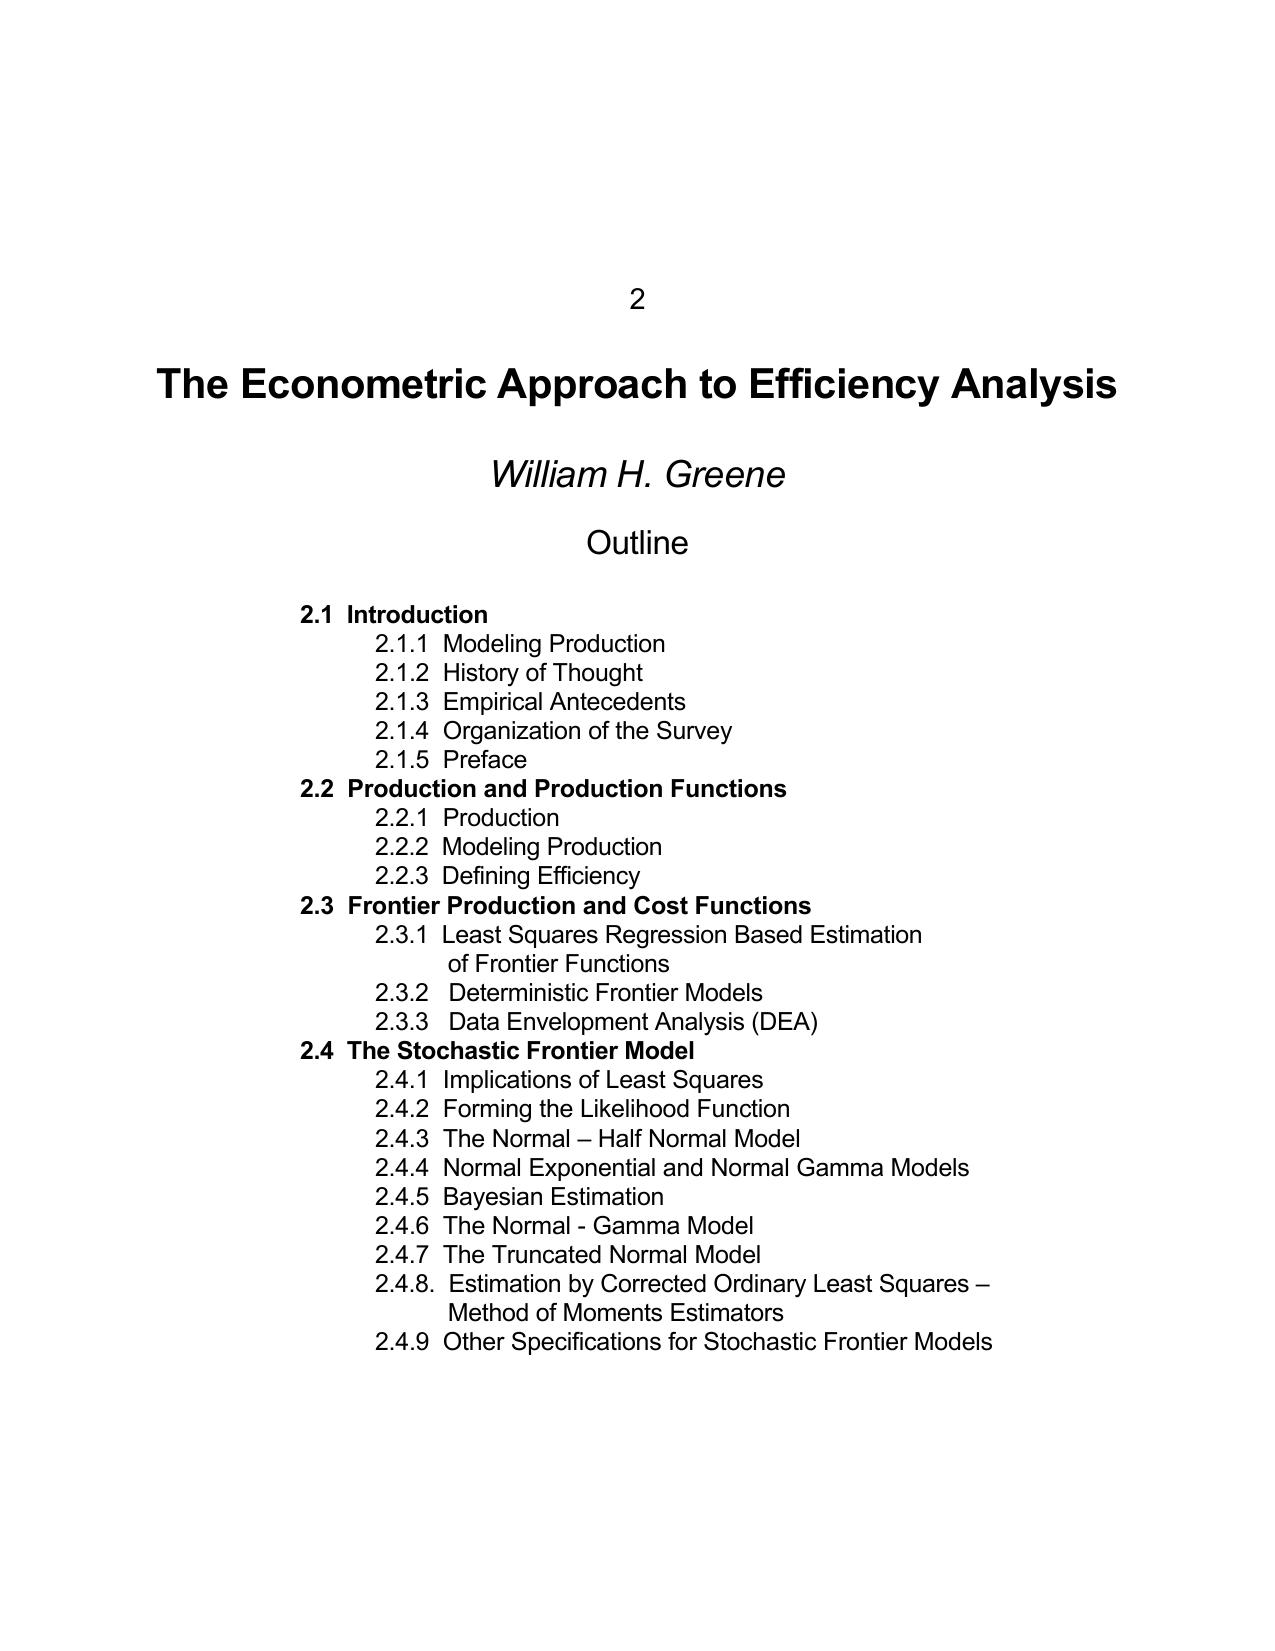 The Econometric Approach